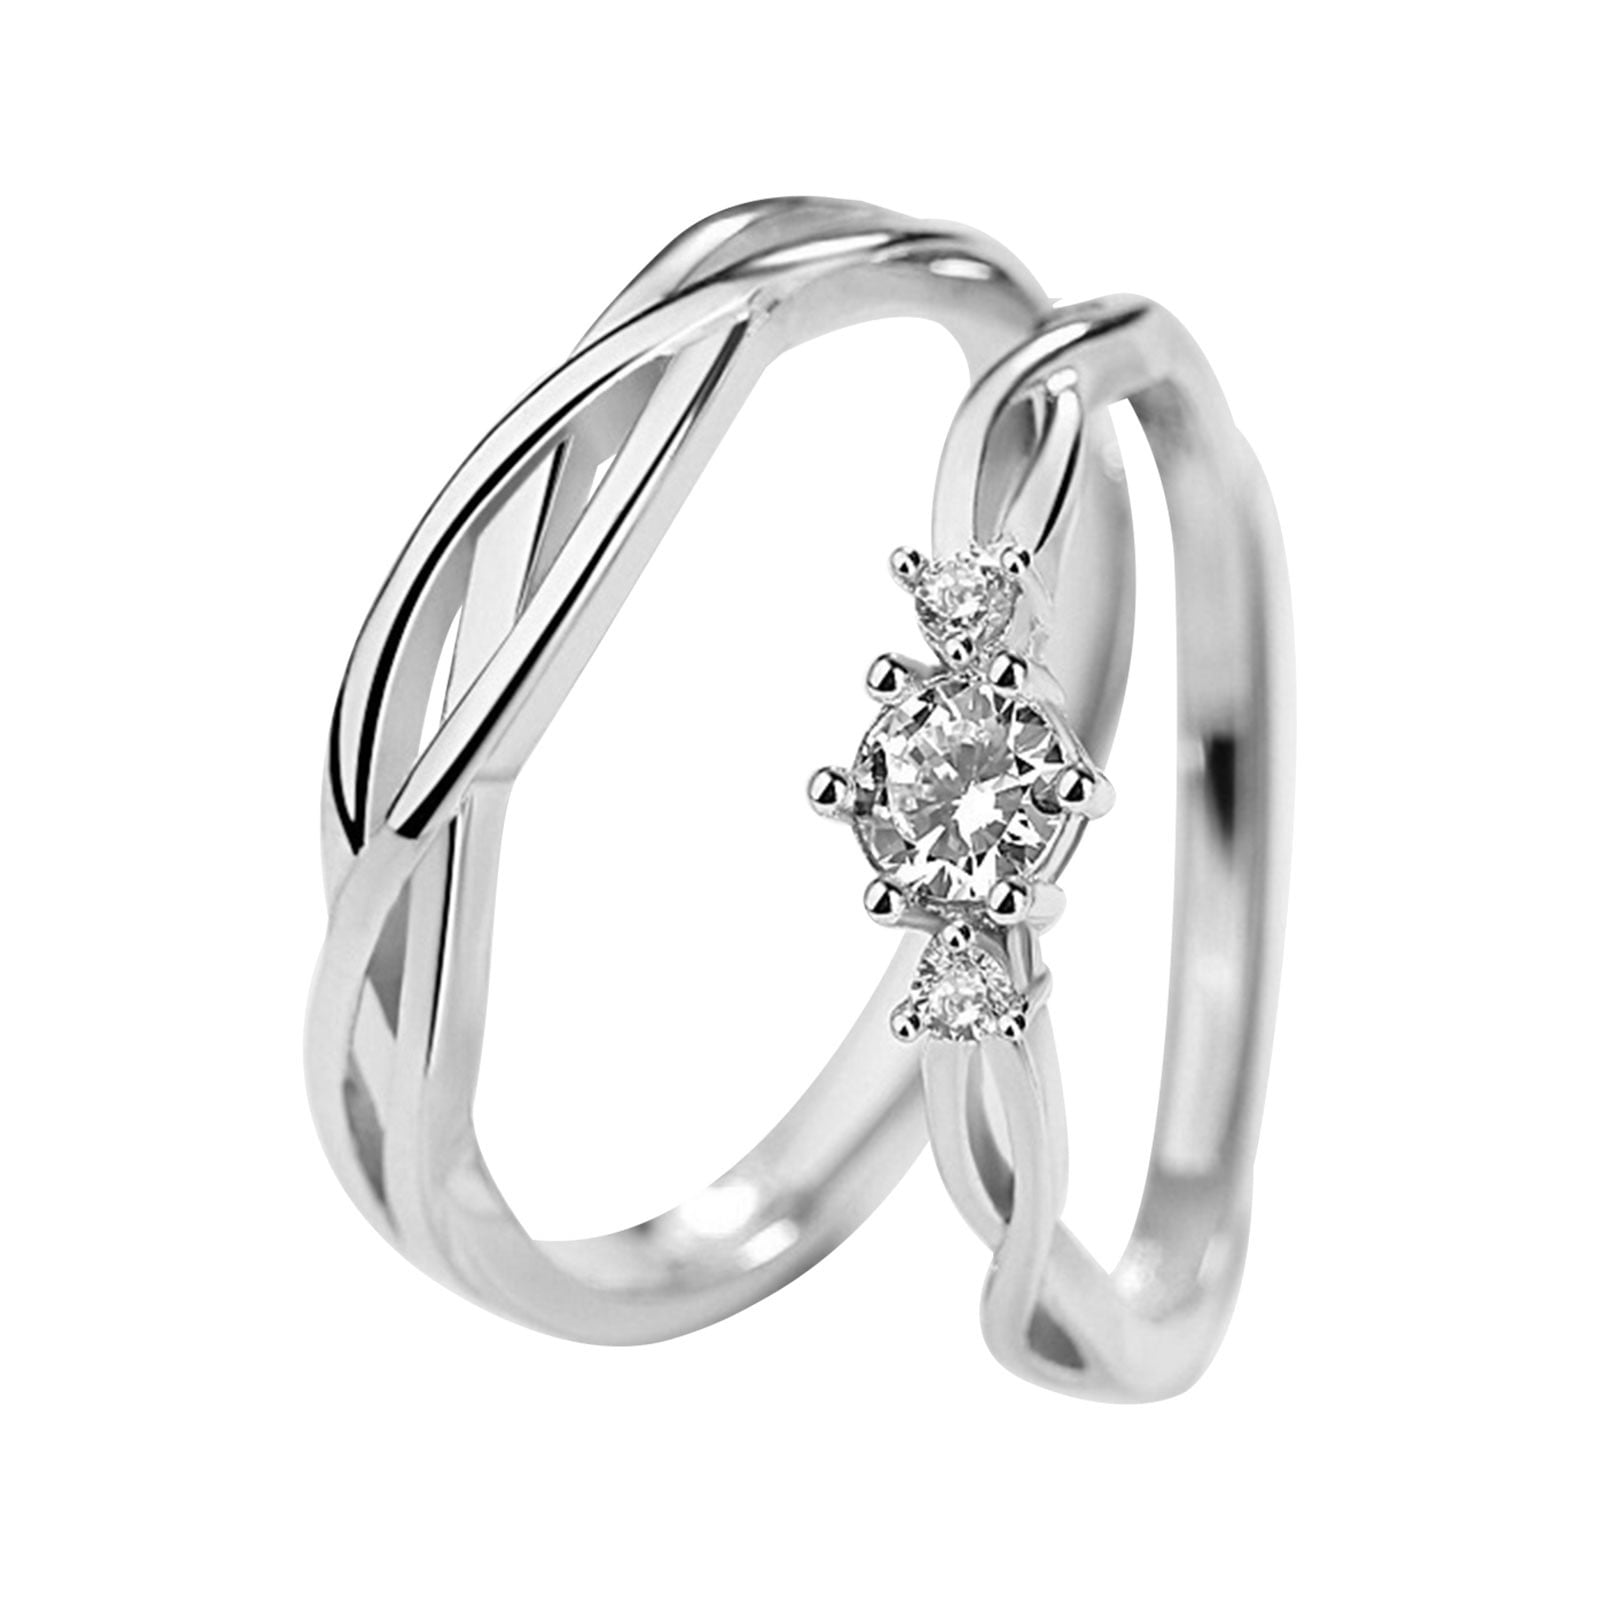 Beautiful Heart Rings | Fashionable Gifts For Her | Women Sterling Silver  Rings | Adjustable Zircona Diamond Rings For Girls